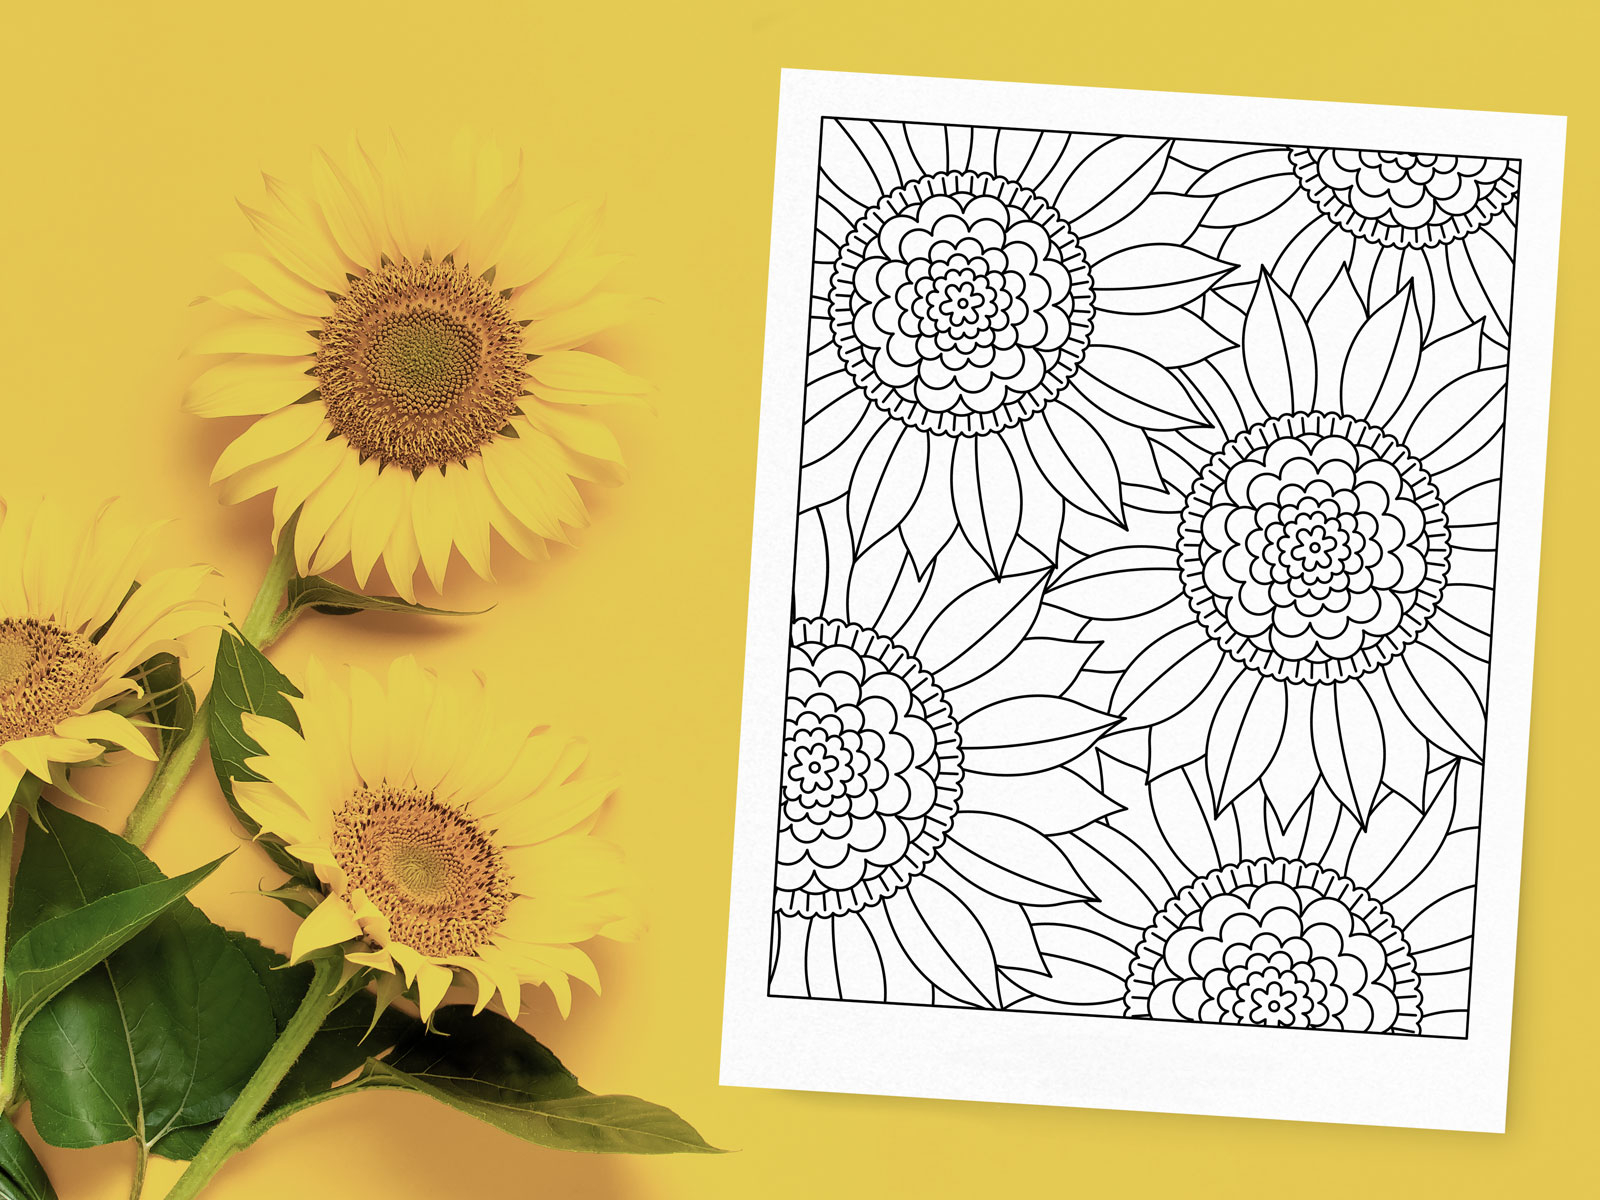 Sunflower coloring pages by shelby warwood for siege media on